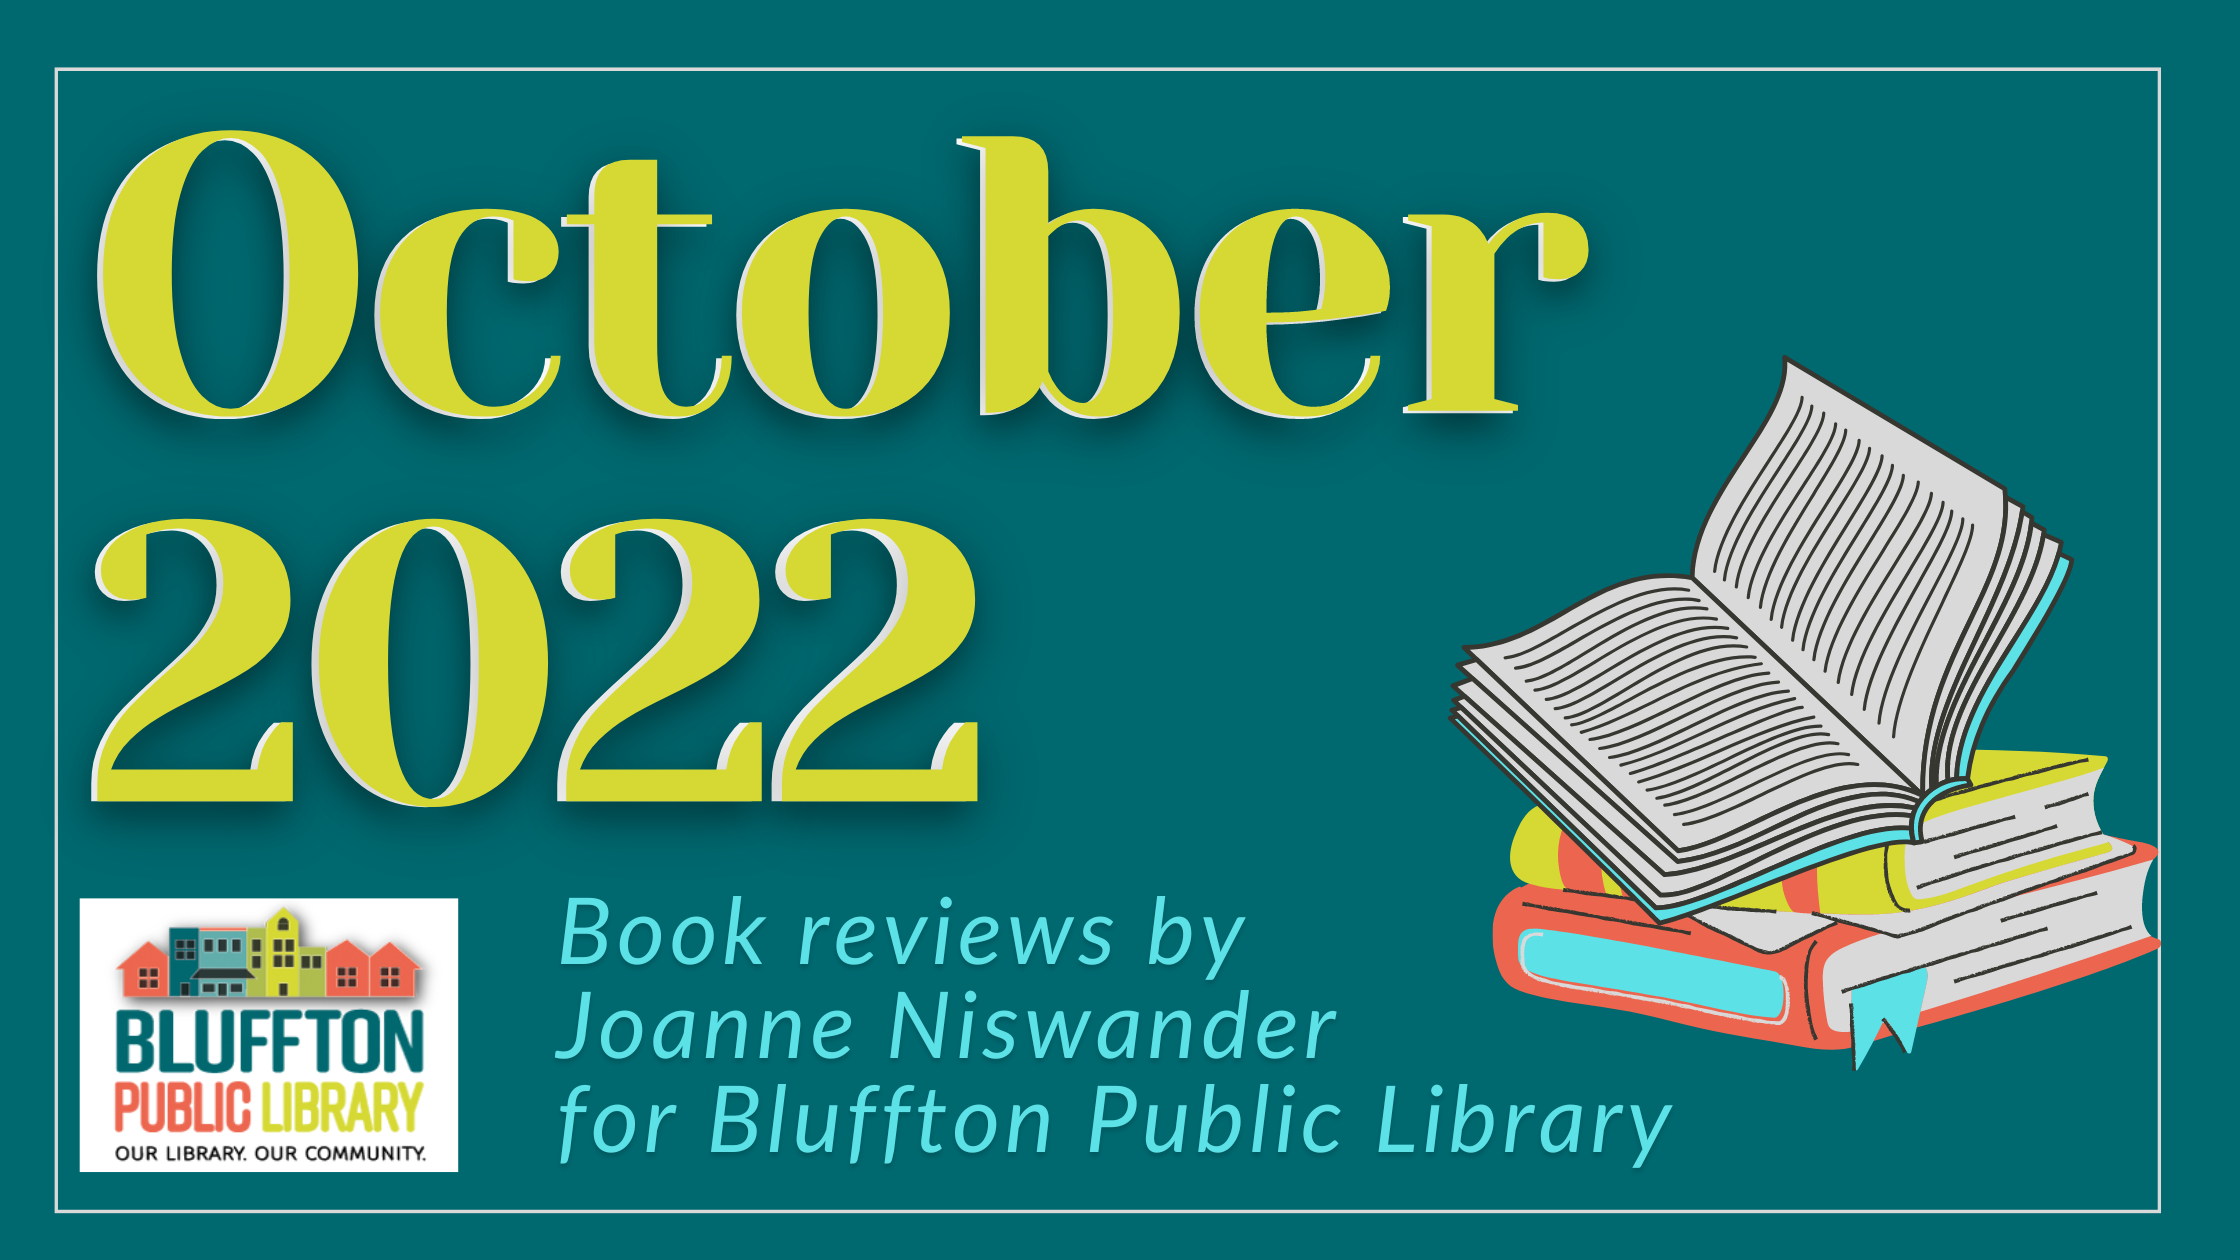 Joanne's book reviews for October 2022